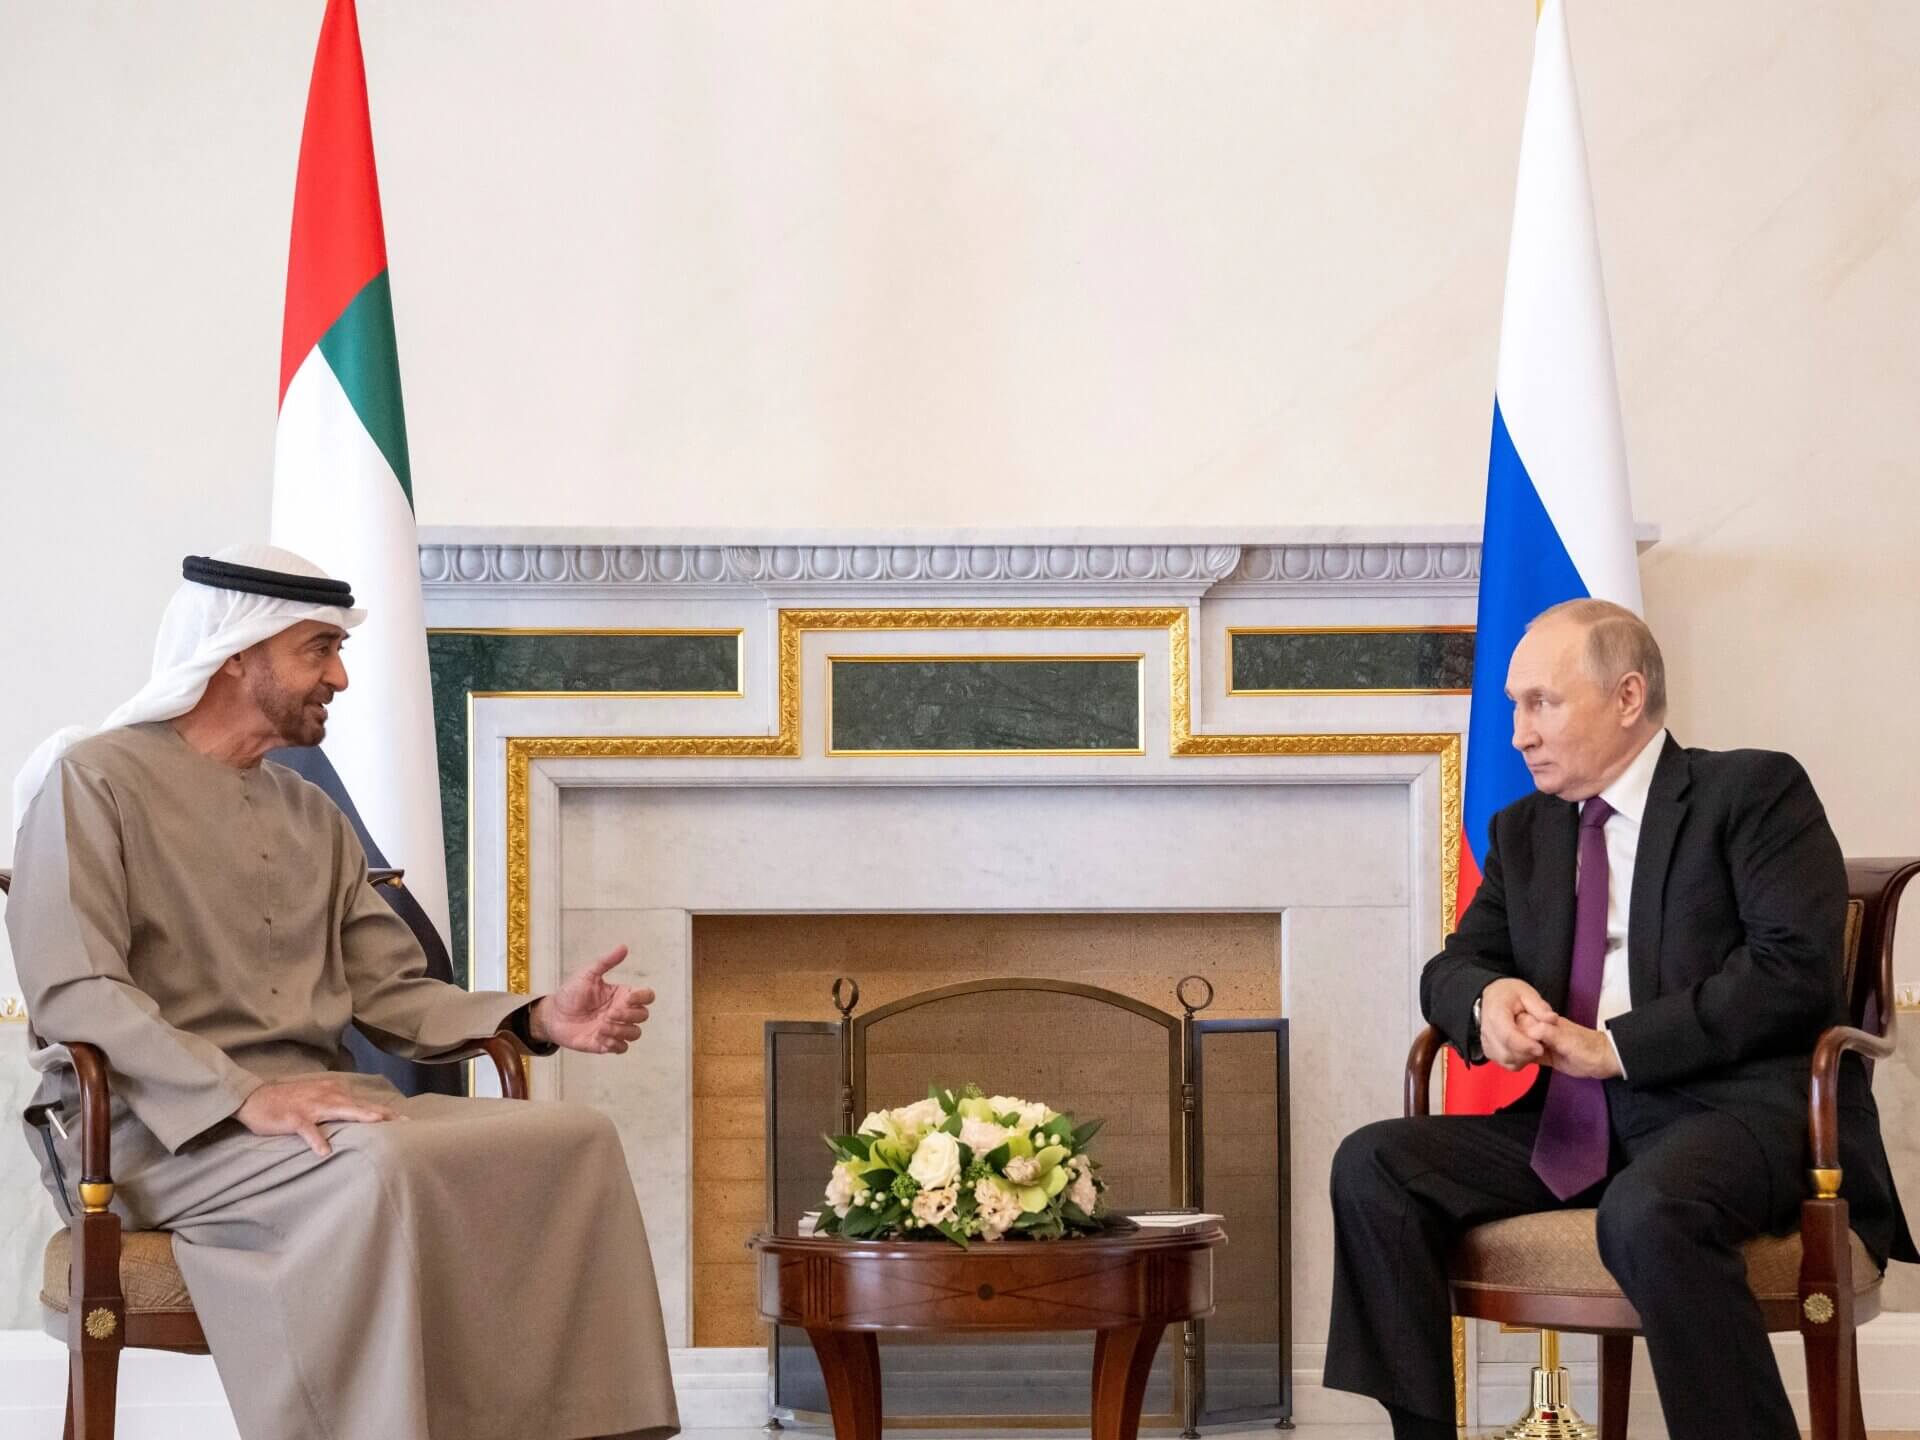 UAE Profiting from Russia’s Economic Turmoil, Ties with Moscow Warmer: Wall Street Journal